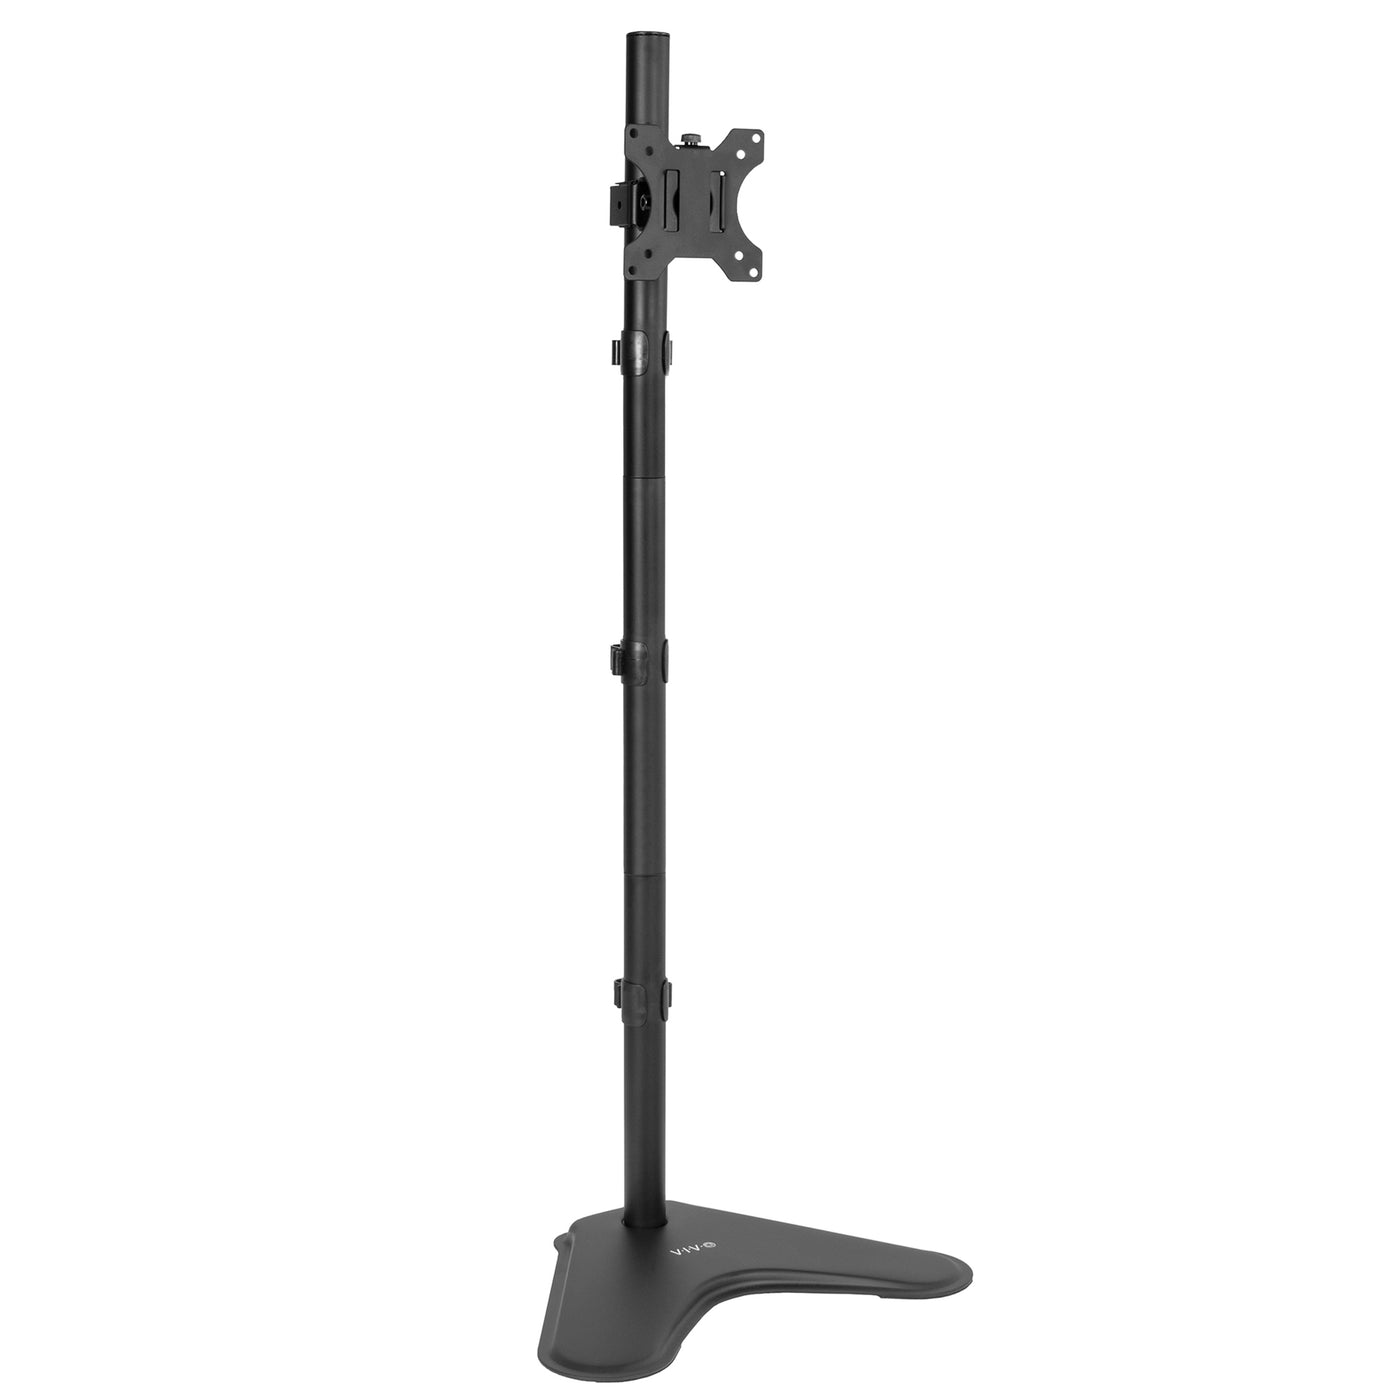 Single Monitor Extra Tall Desk Stand